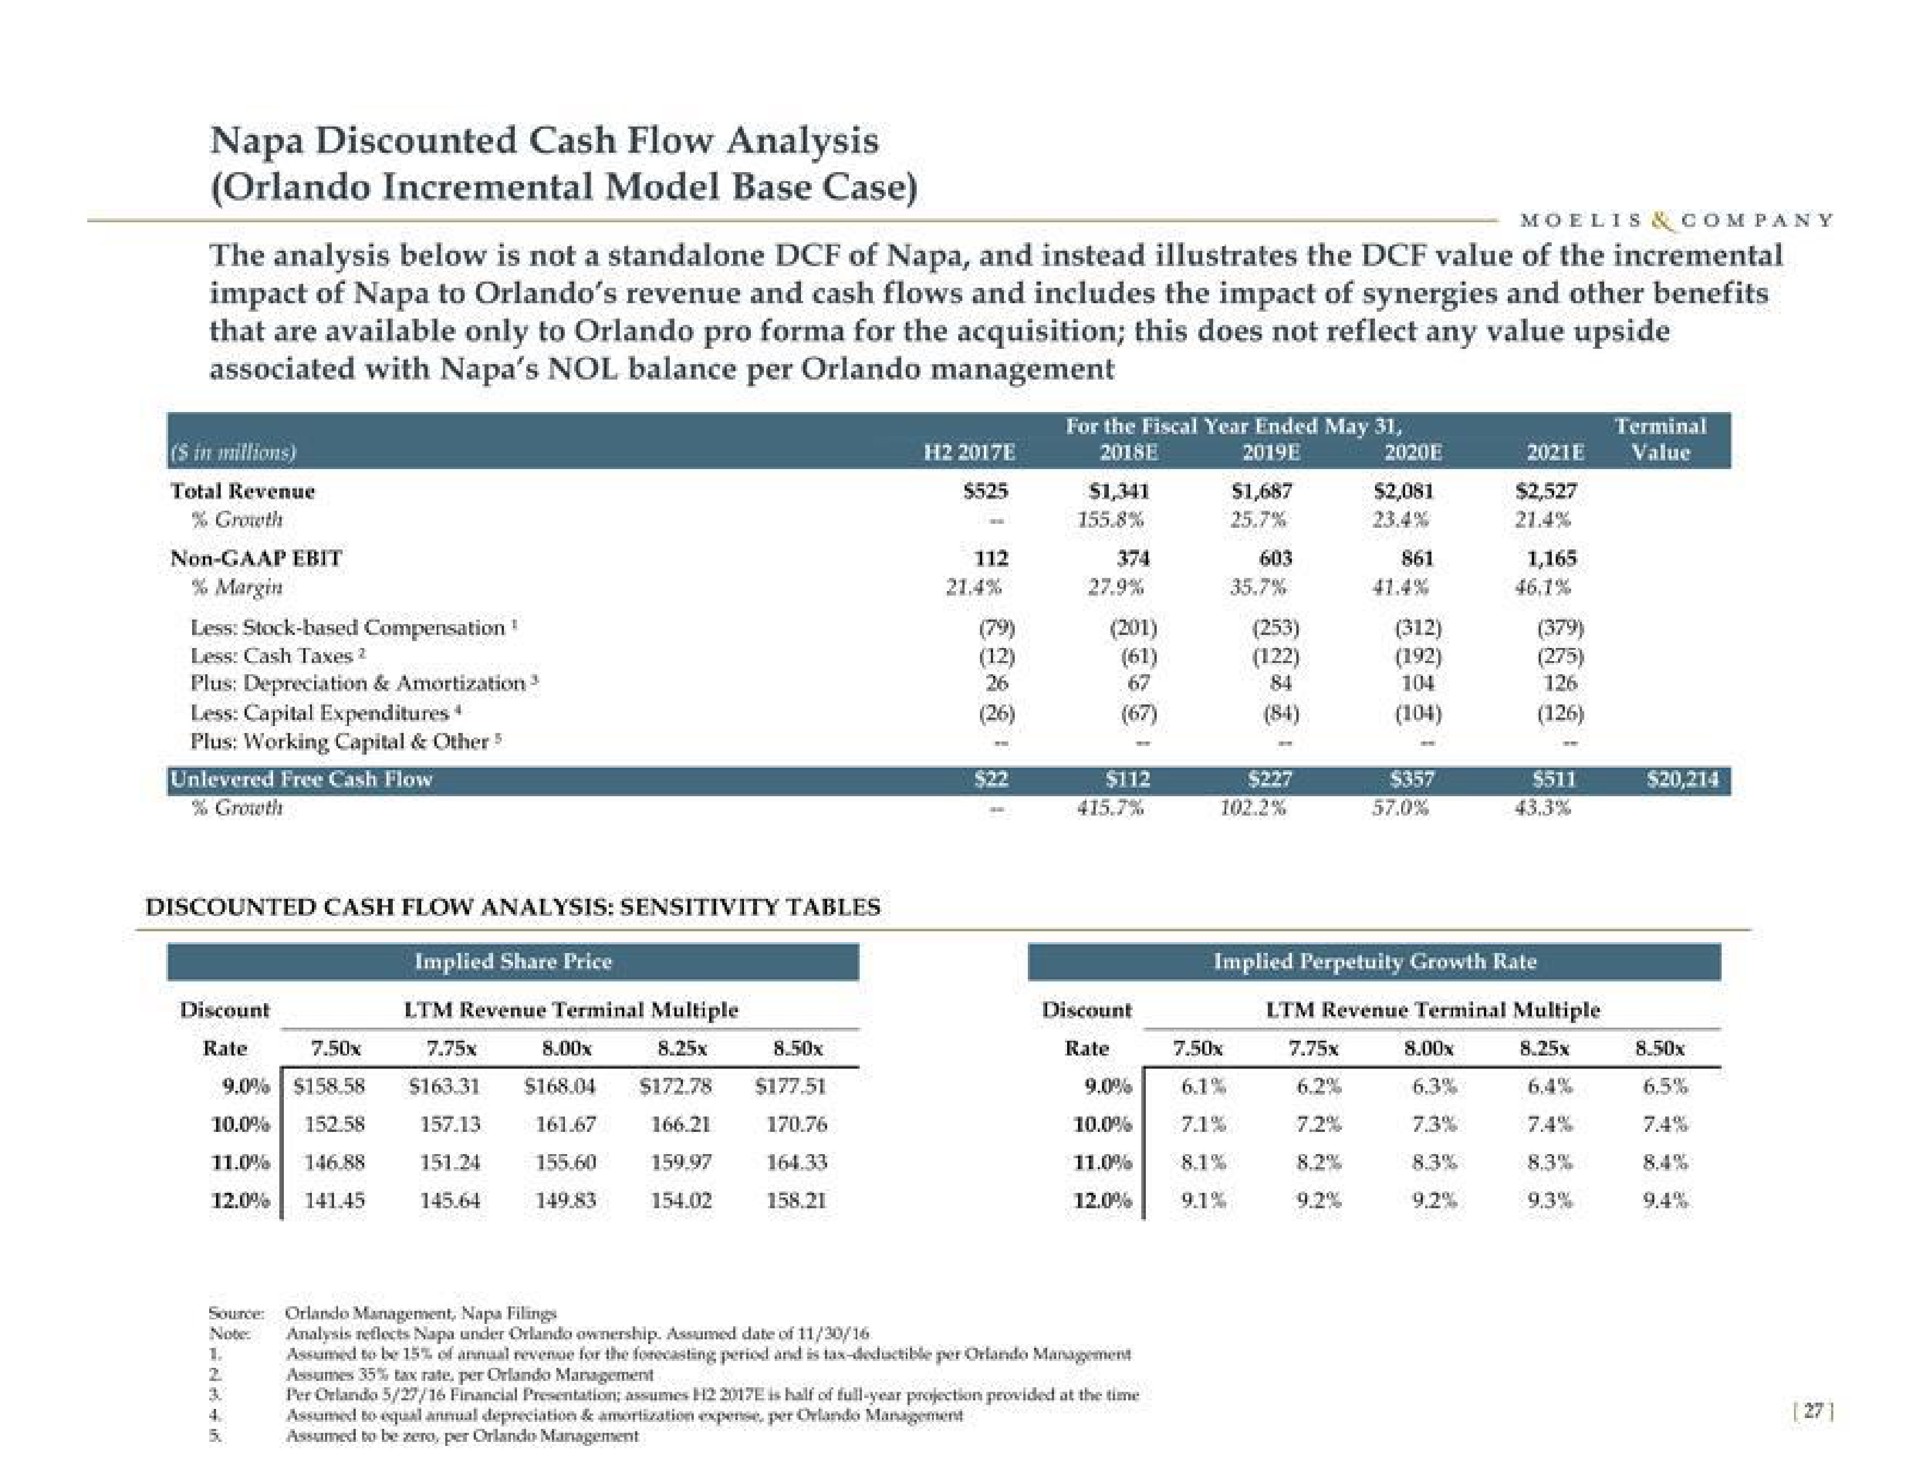 napa discounted cash flow analysis incremental model base case the analysis below is not a of napa and instead illustrates the value of the incremental impact of napa to revenue and cash flows and includes the impact of synergies and other benefits pen the | Moelis & Company